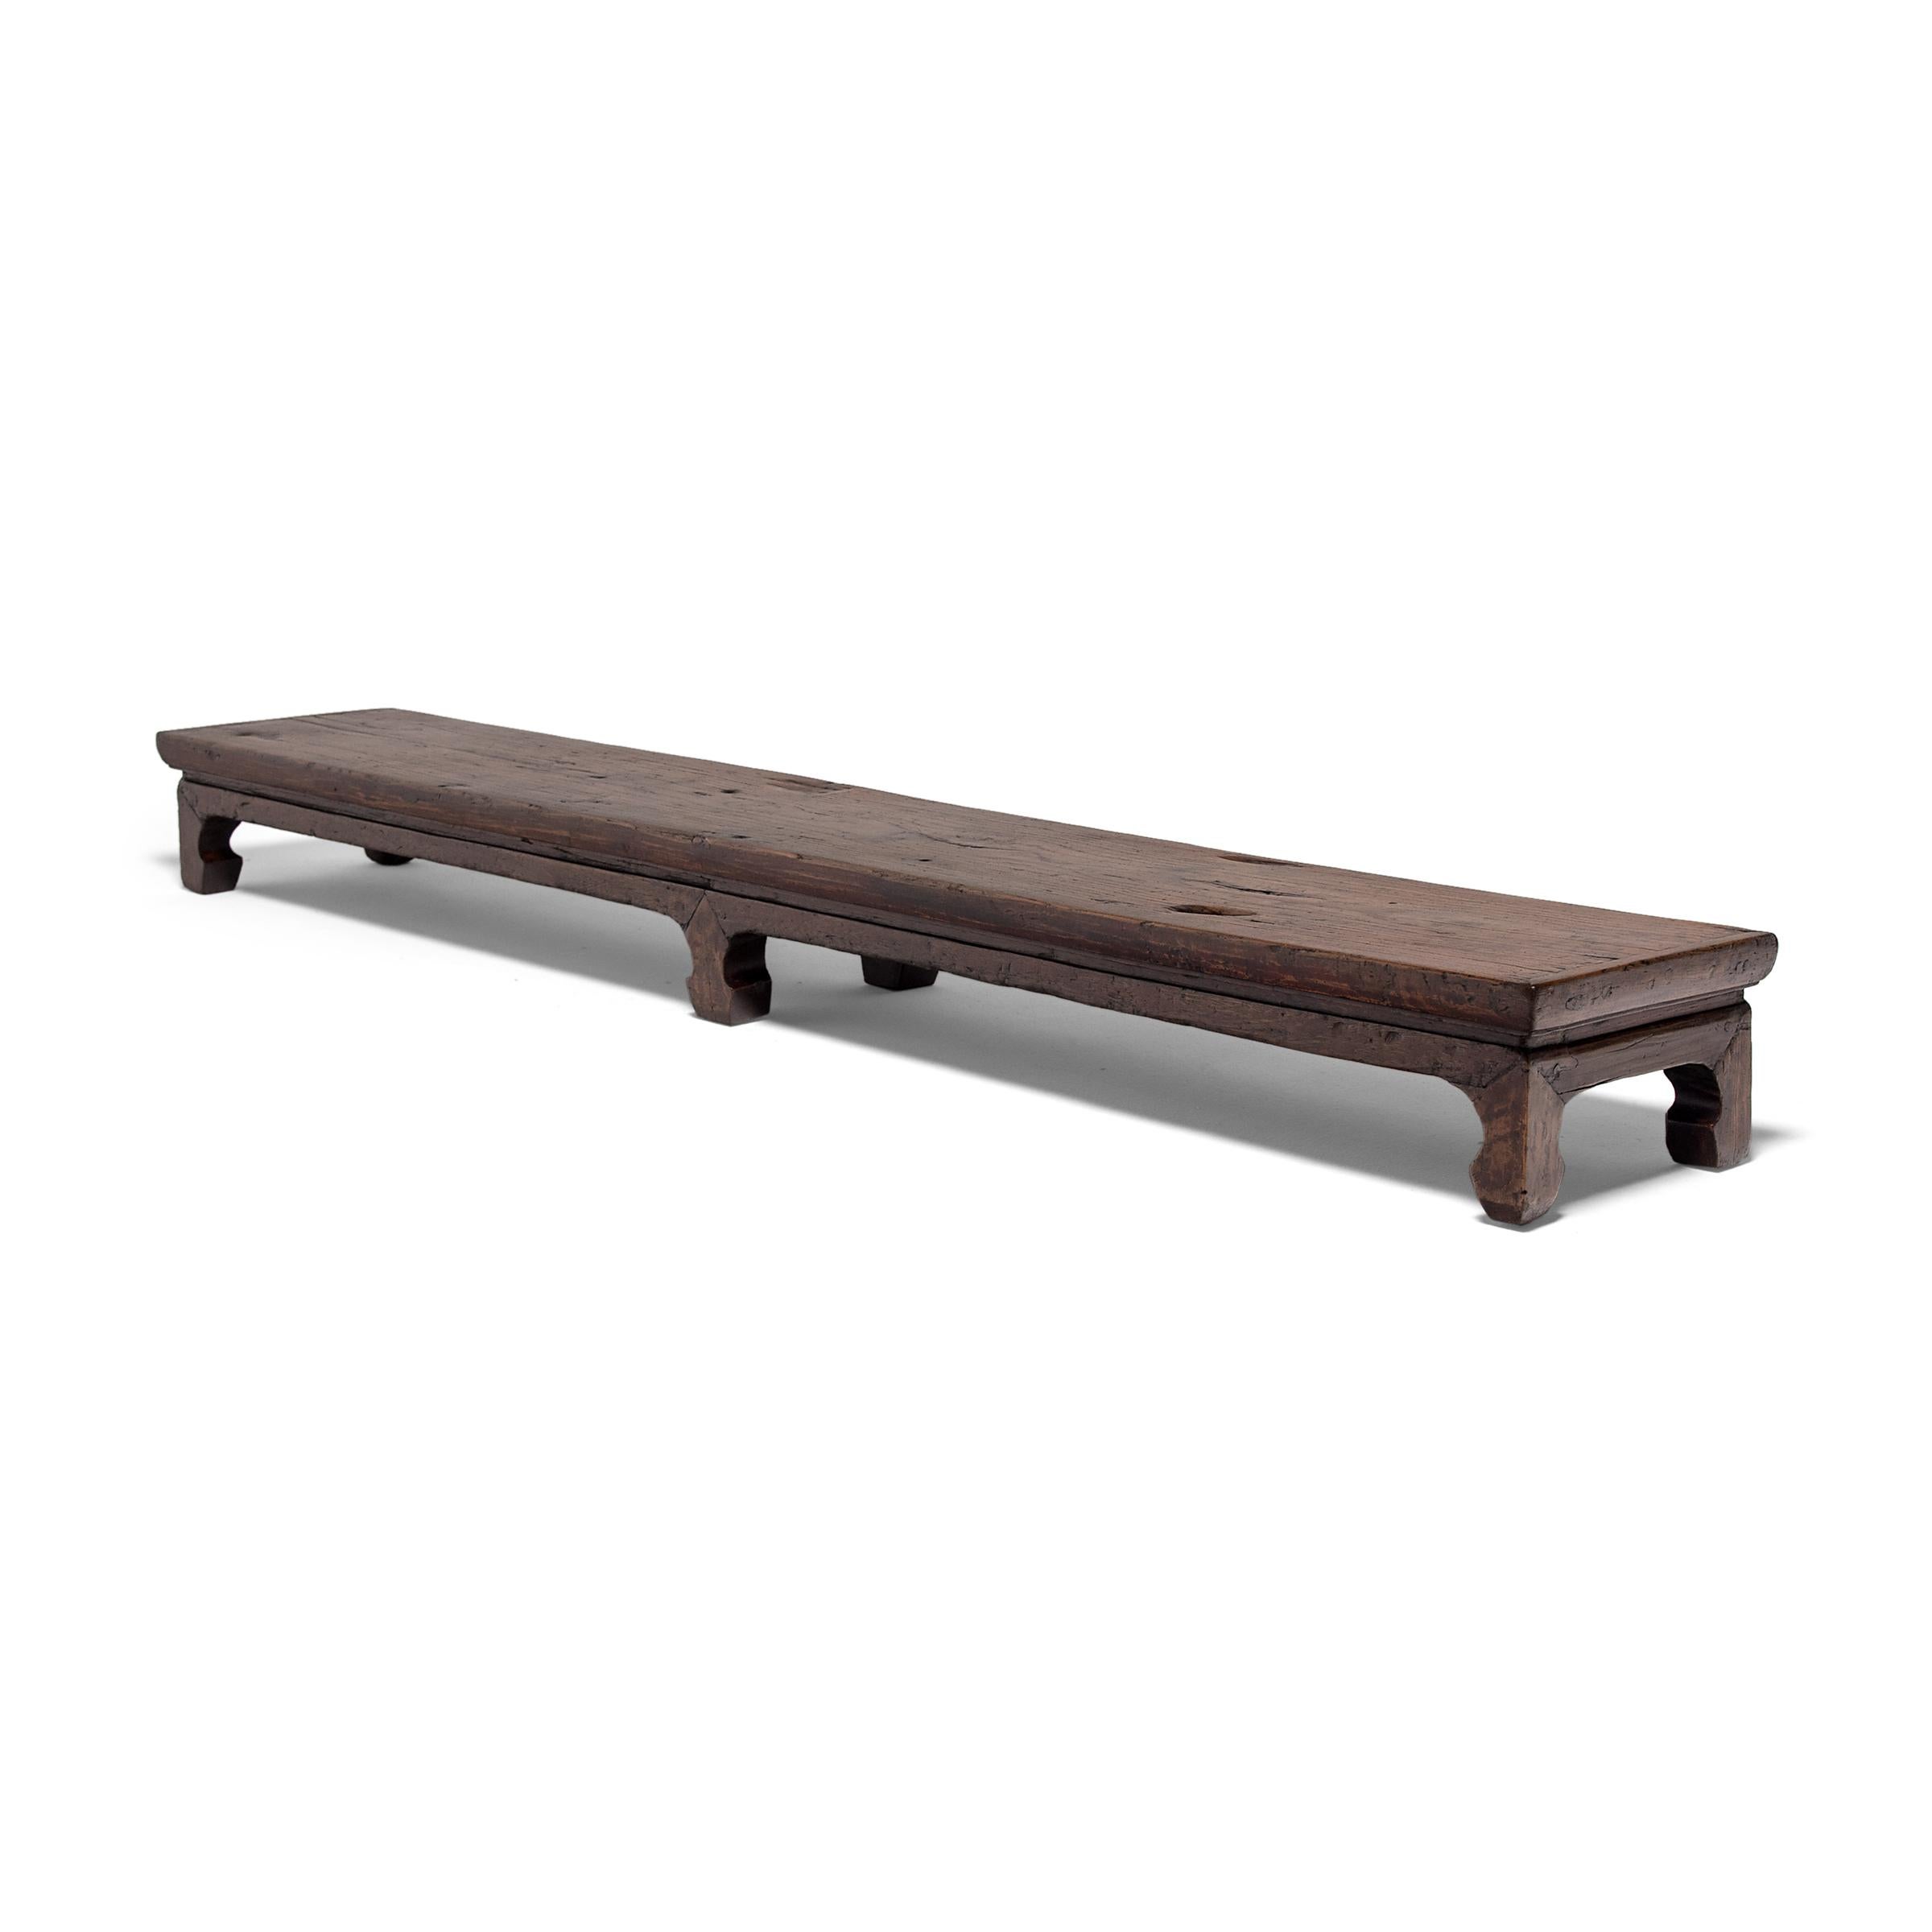 Designed to resemble the low tables placed atop a kang platform, this 19th-century low bench from Henan province is actually a step used for easily getting in and out of a raised daybed. Constructed of richly aged northern elmwood (yumu), the